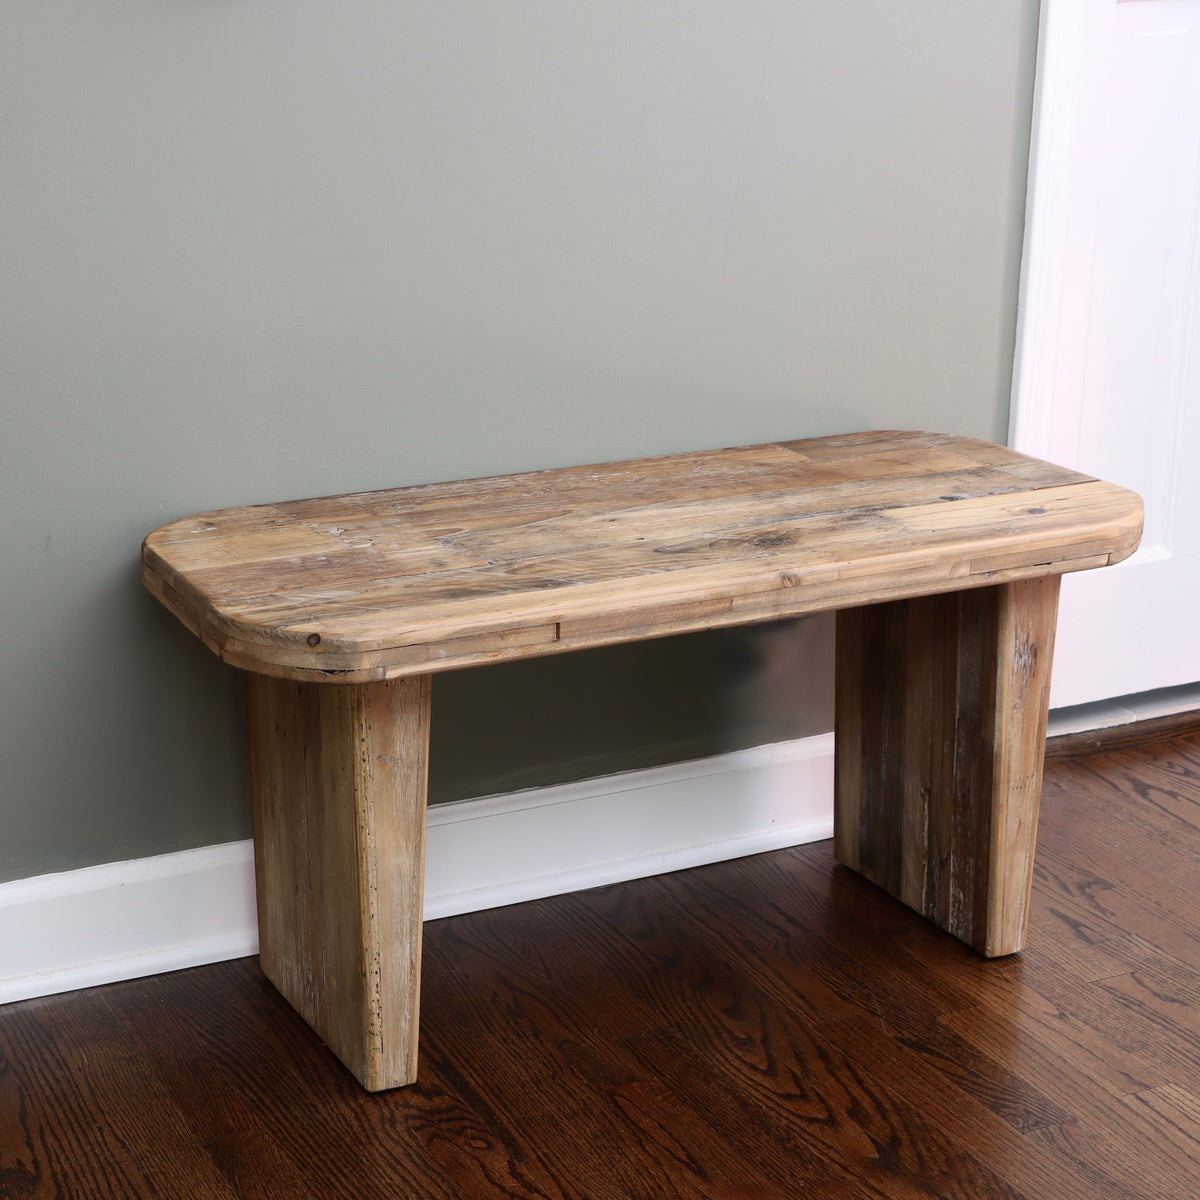 Ember Recycled Wooden Bench - Holistic Habitat 